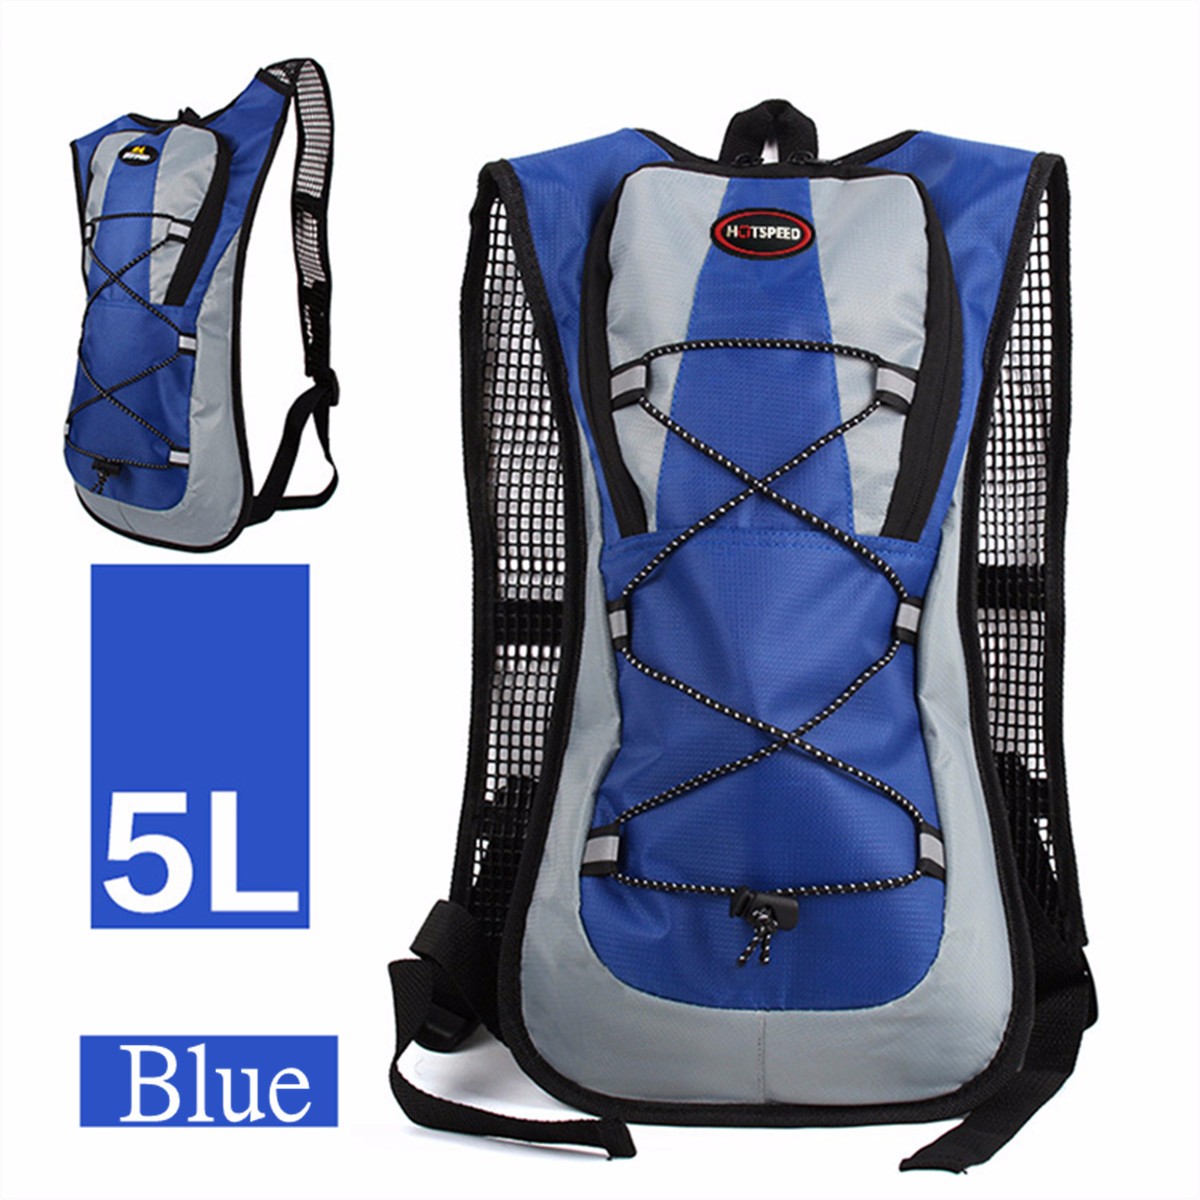 IPRee-5L-Running-Hydration-Backpack-Rucksack-2L-Straw-Water-Bladder-Bag-For-Hiking-Climbing-1126379-3